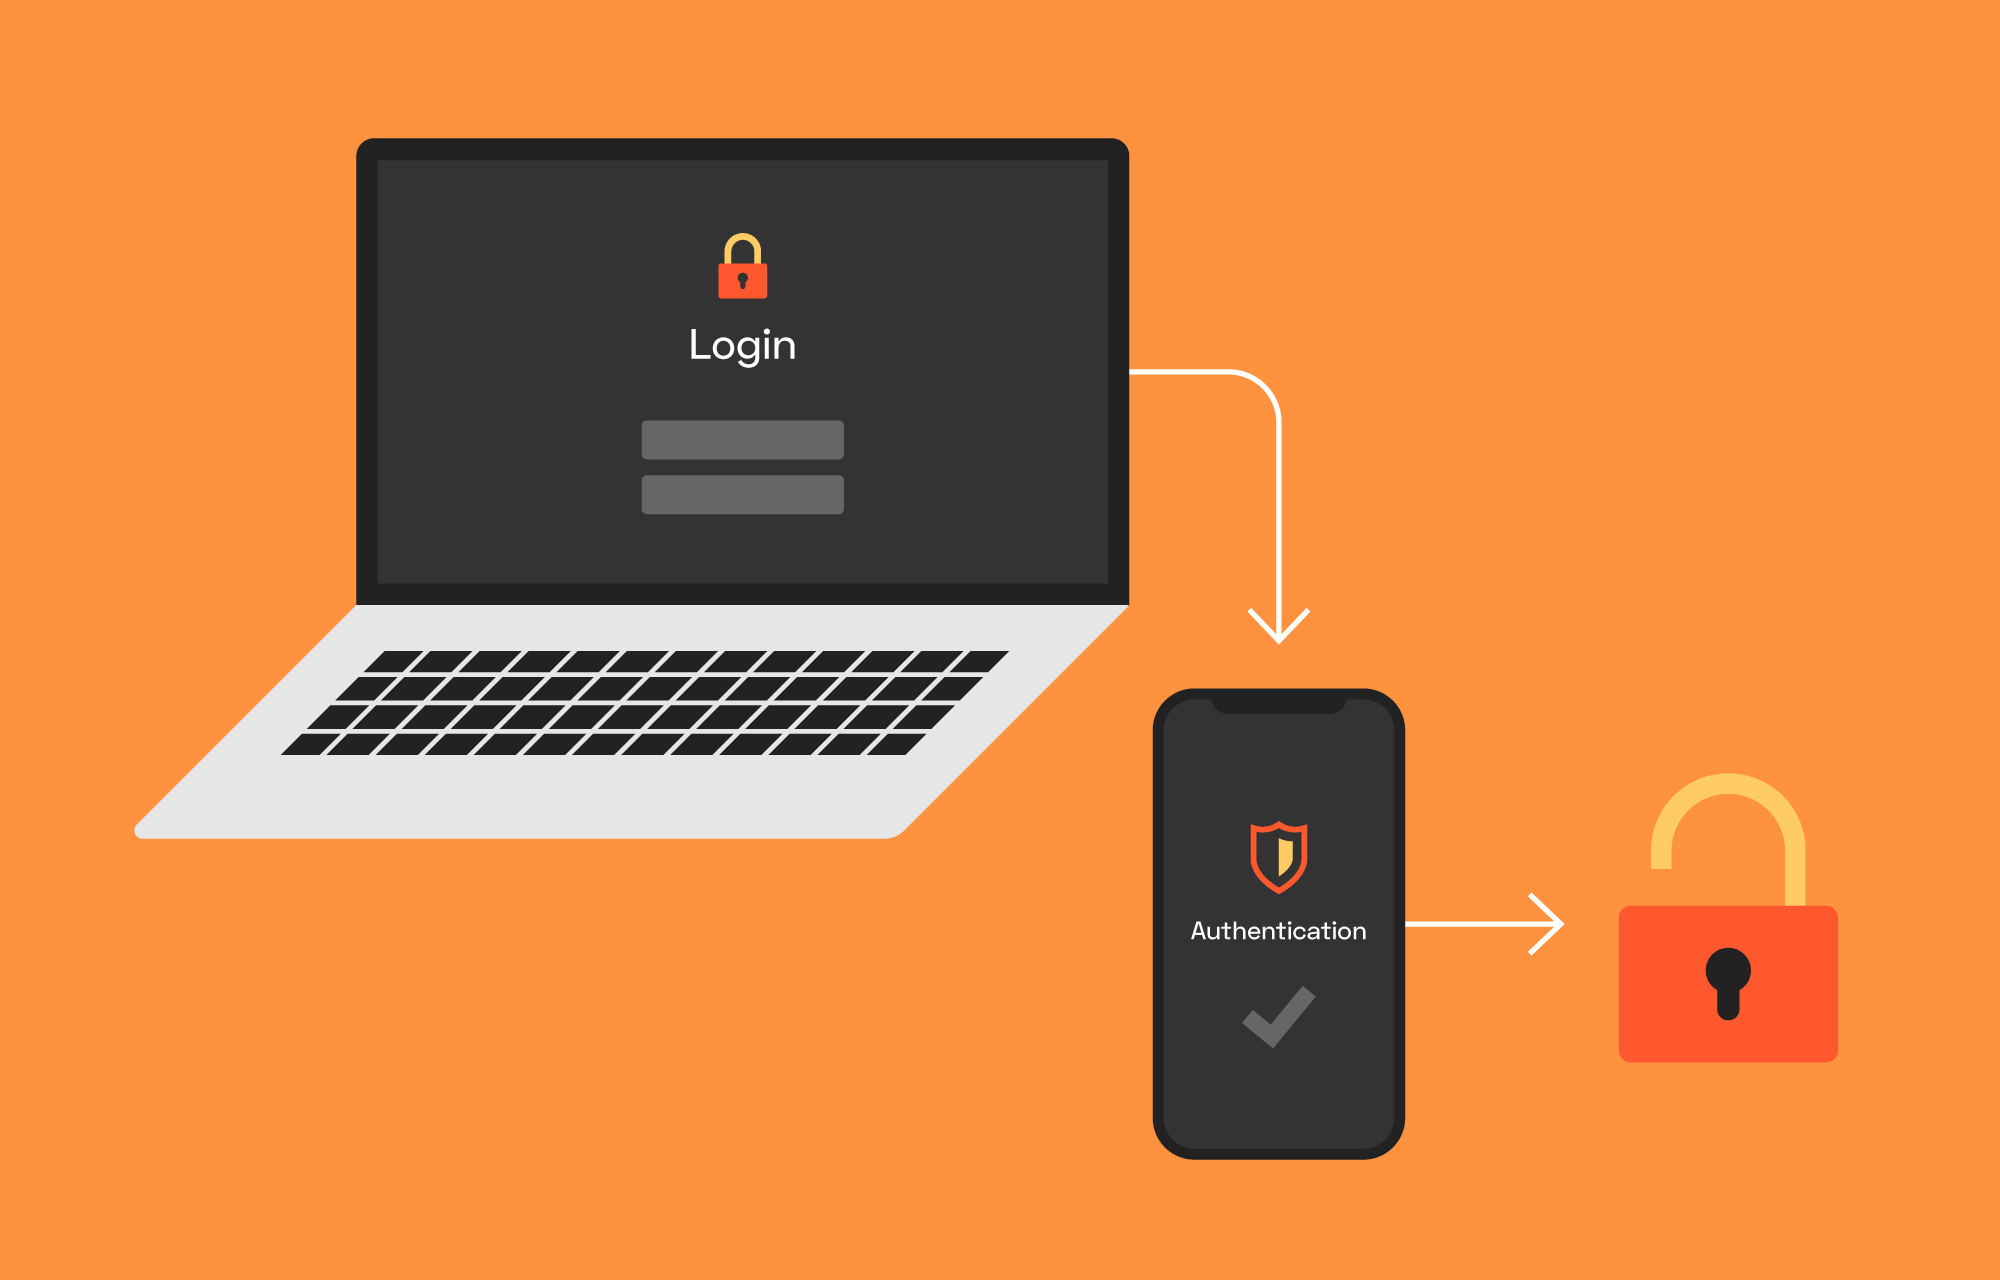 How Two Factor Authentication Can Help & Why You Should Use It